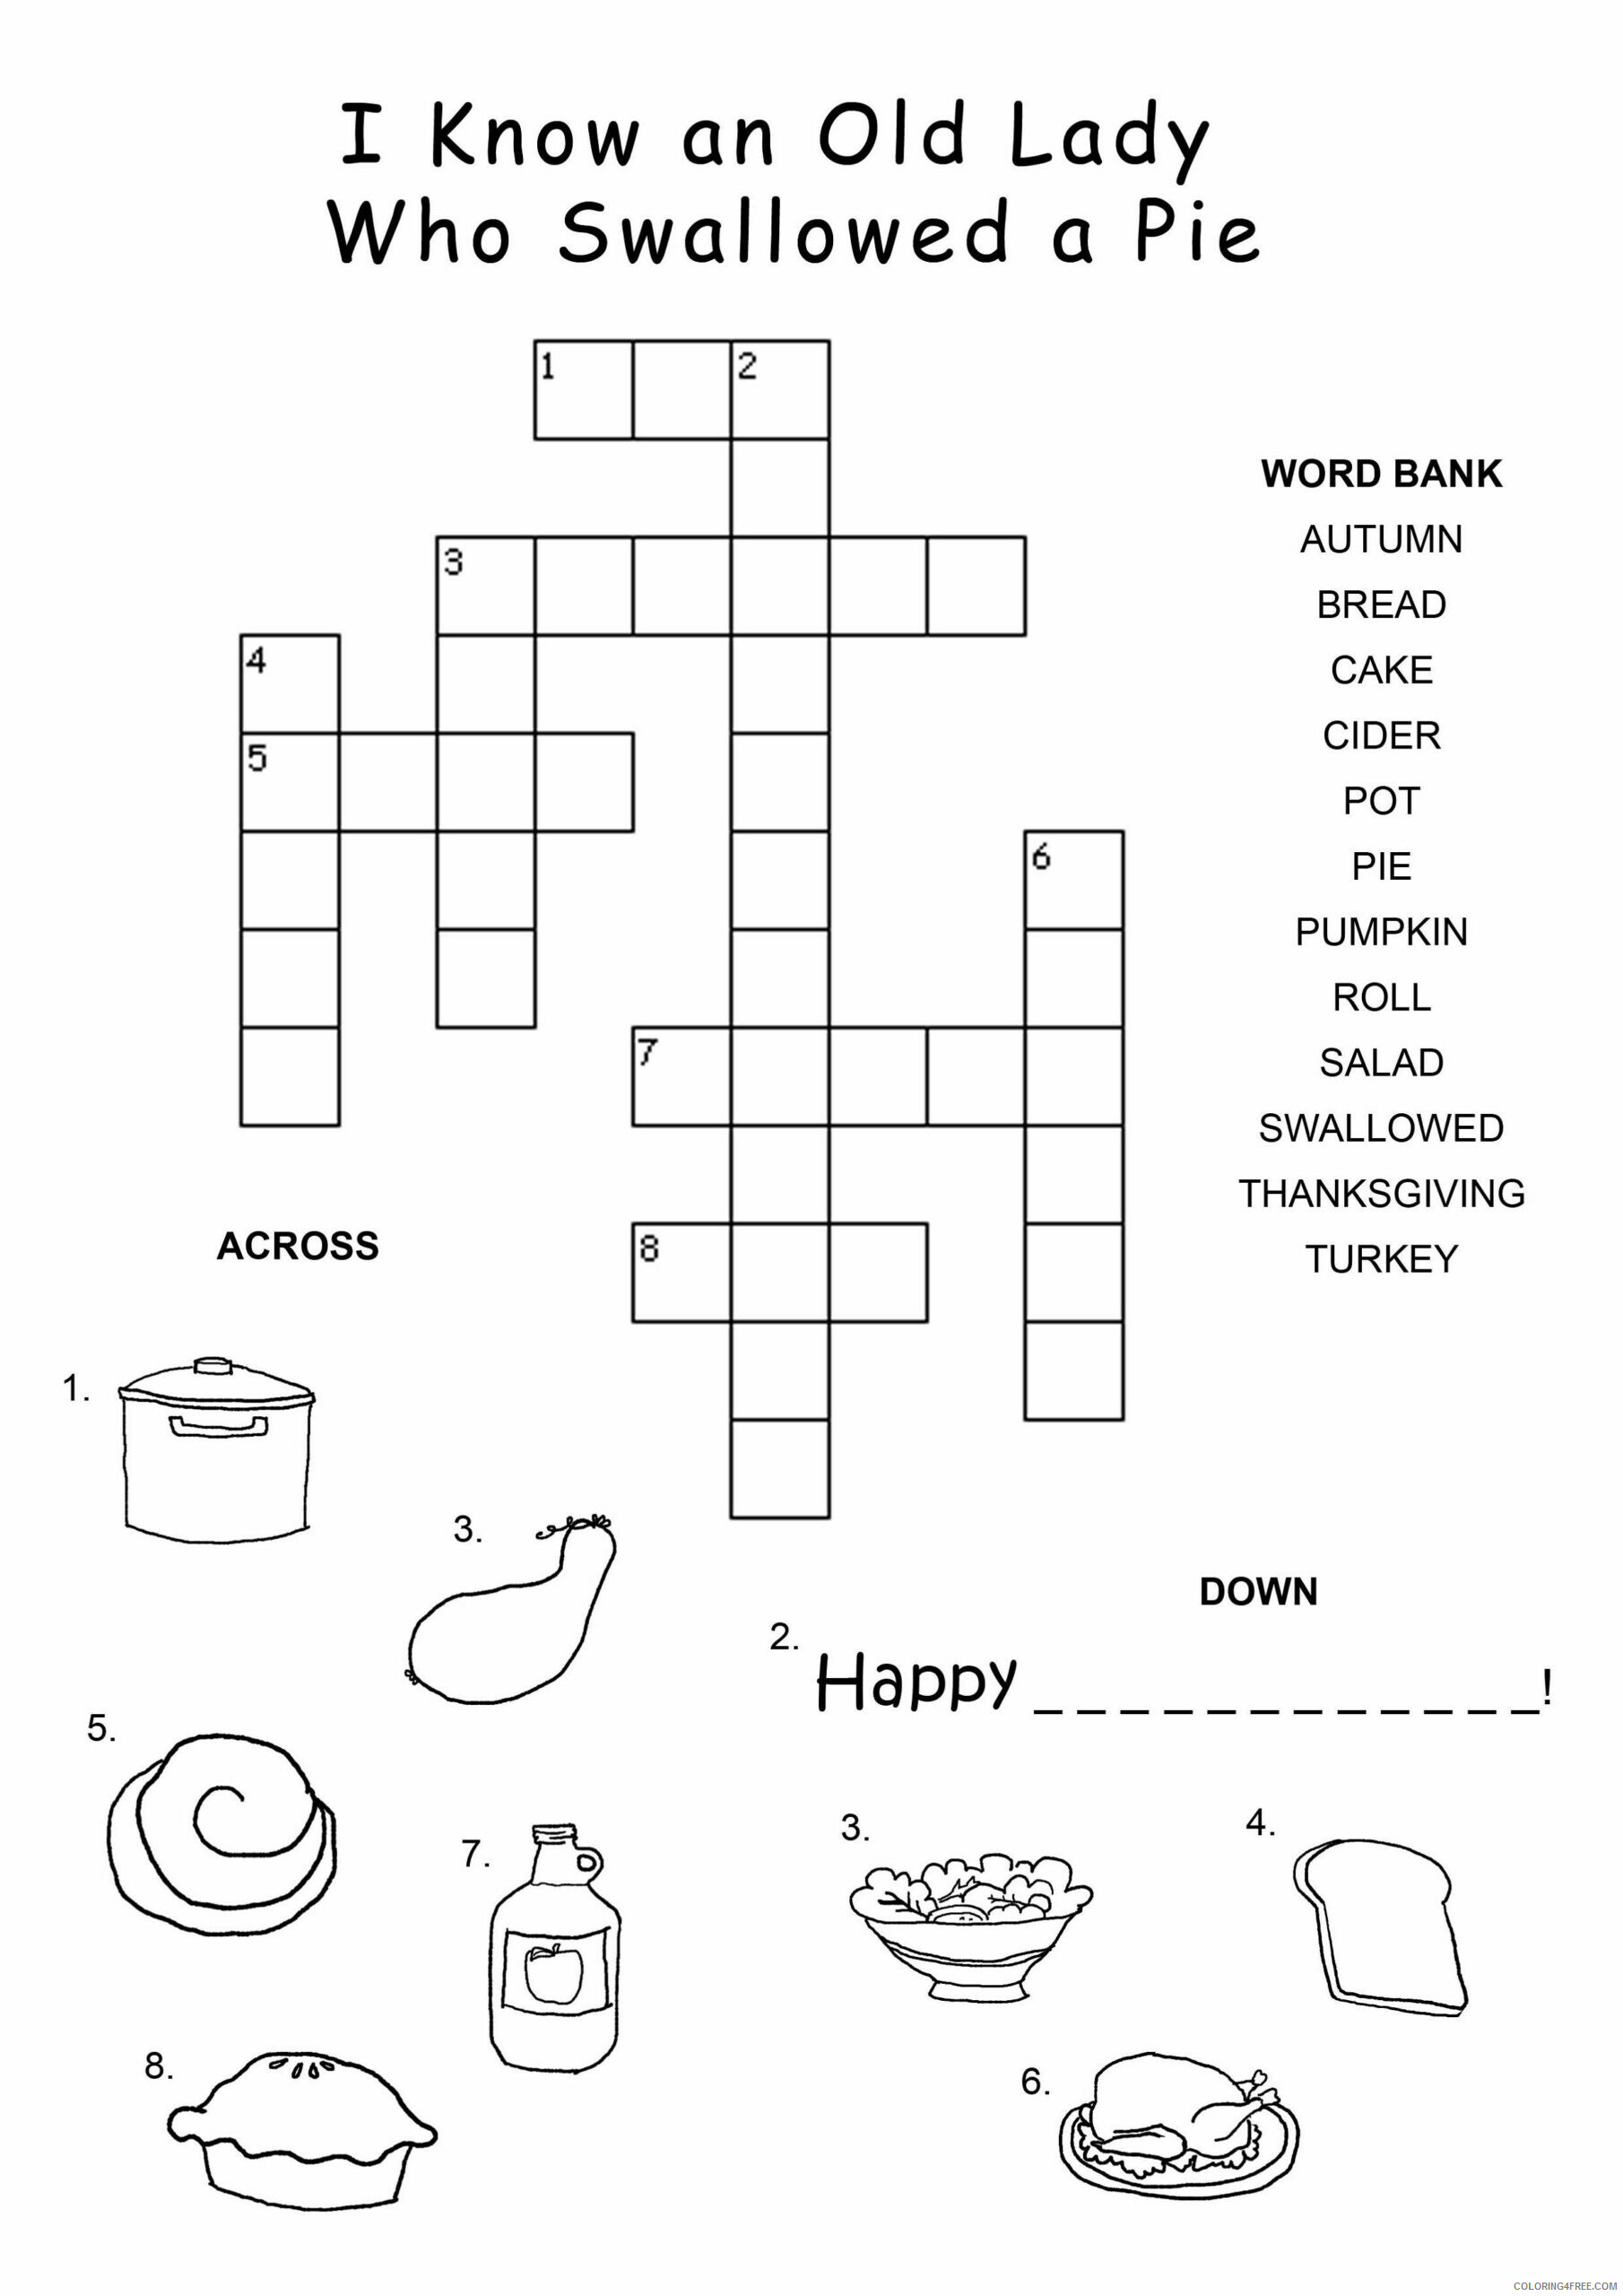 Crossword Puzzle Coloring Pages Free Crossword Puzzles For Kids Printable 2021 Coloring4free